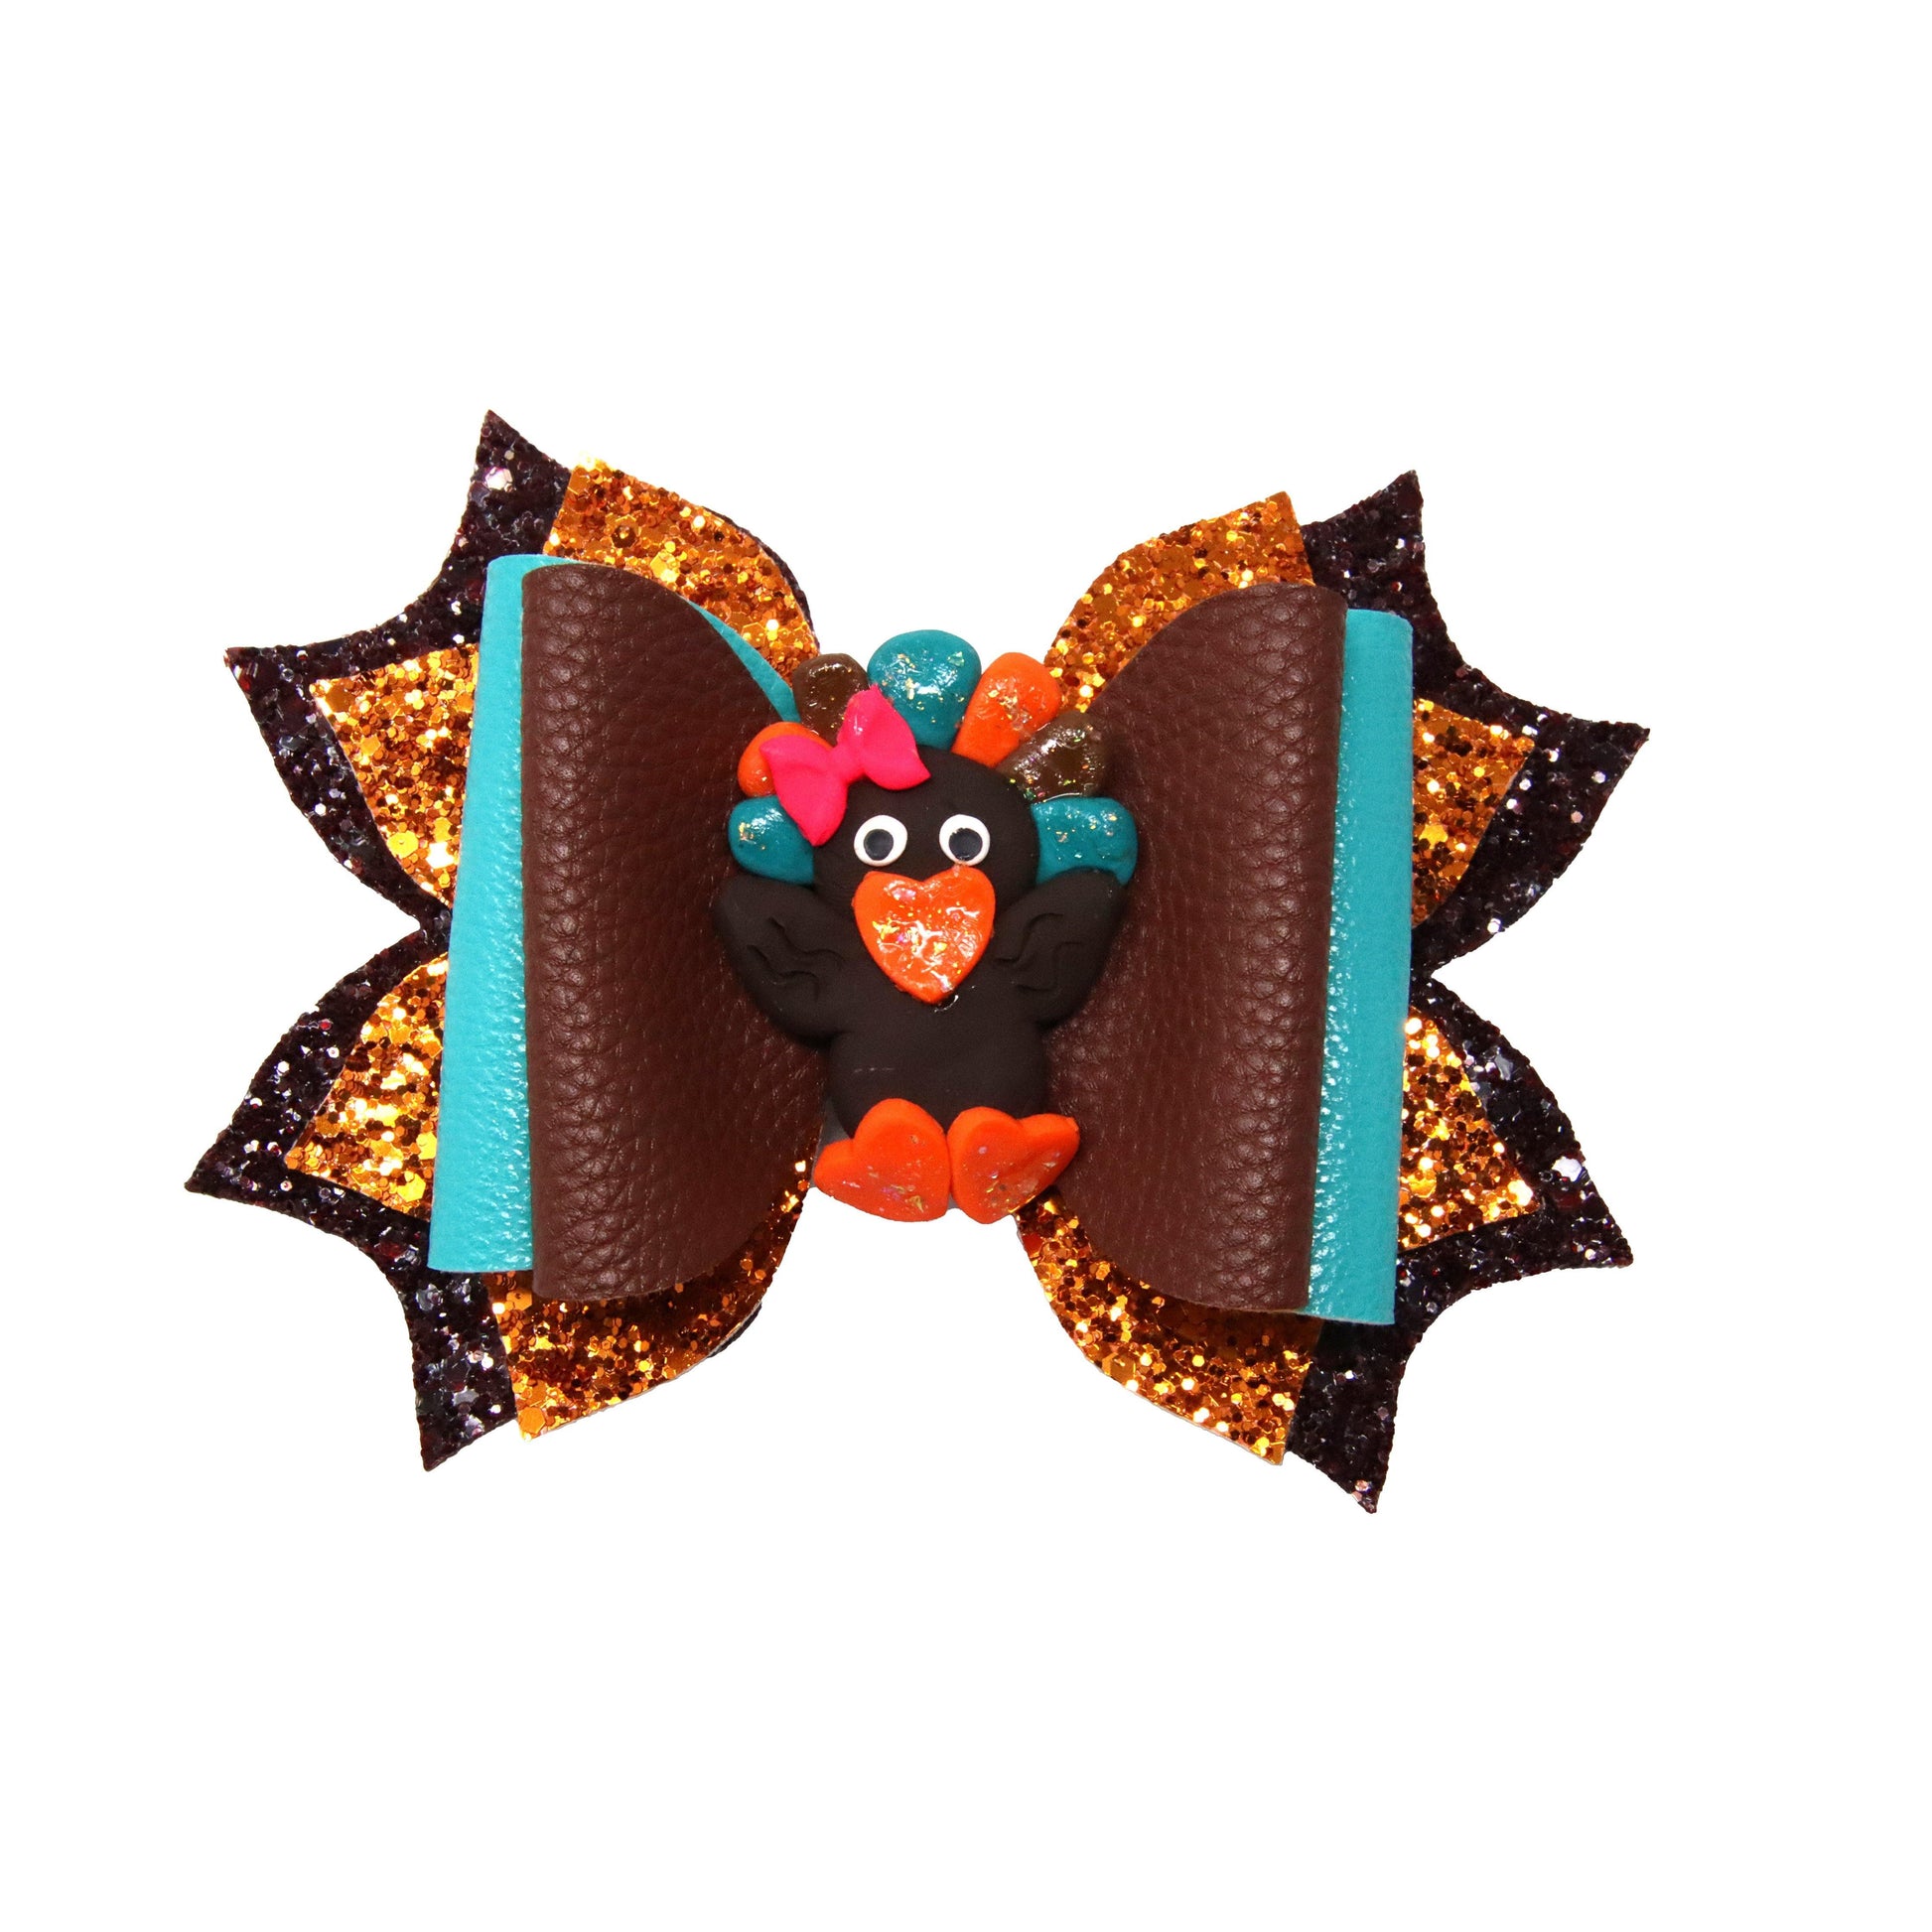 5.5 inch Brown & Teal Double Exquisite Bow with Turkey Clay